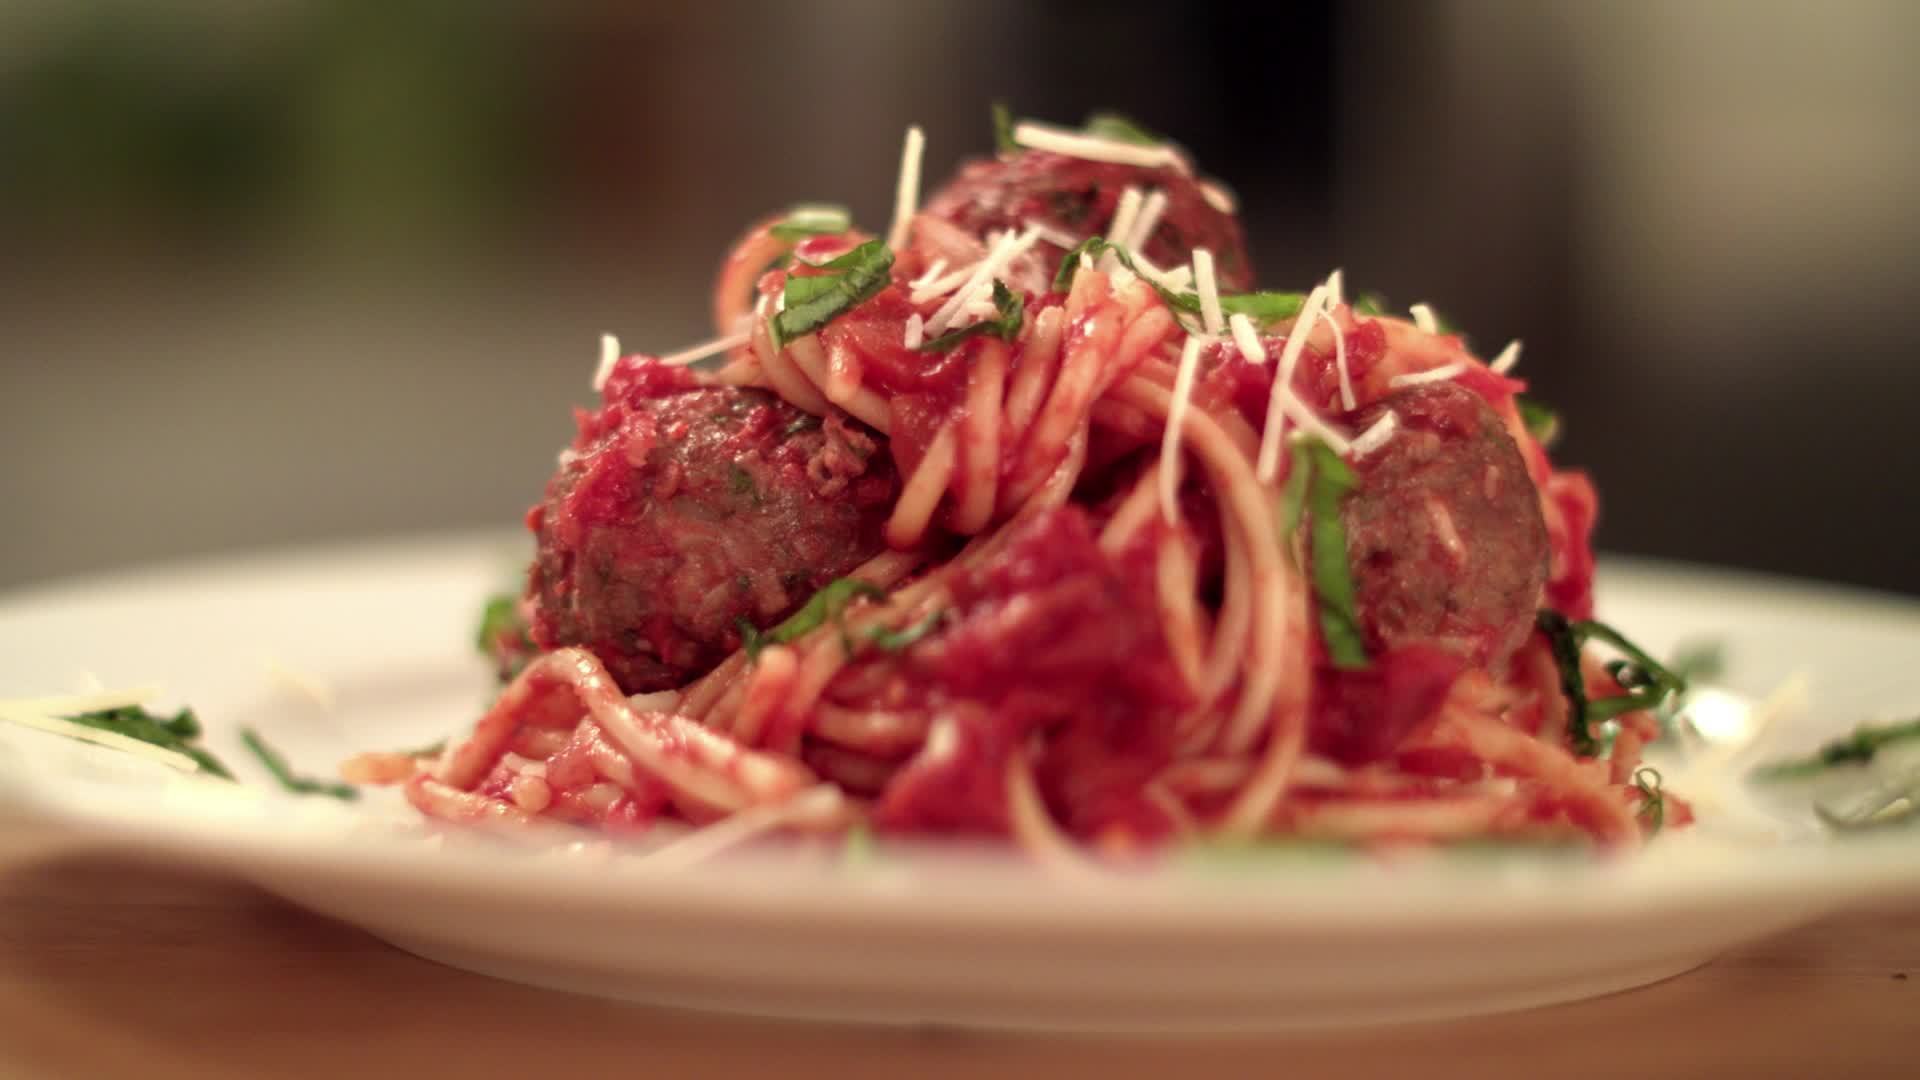 How to Make a Meatball and Other Fun Facts